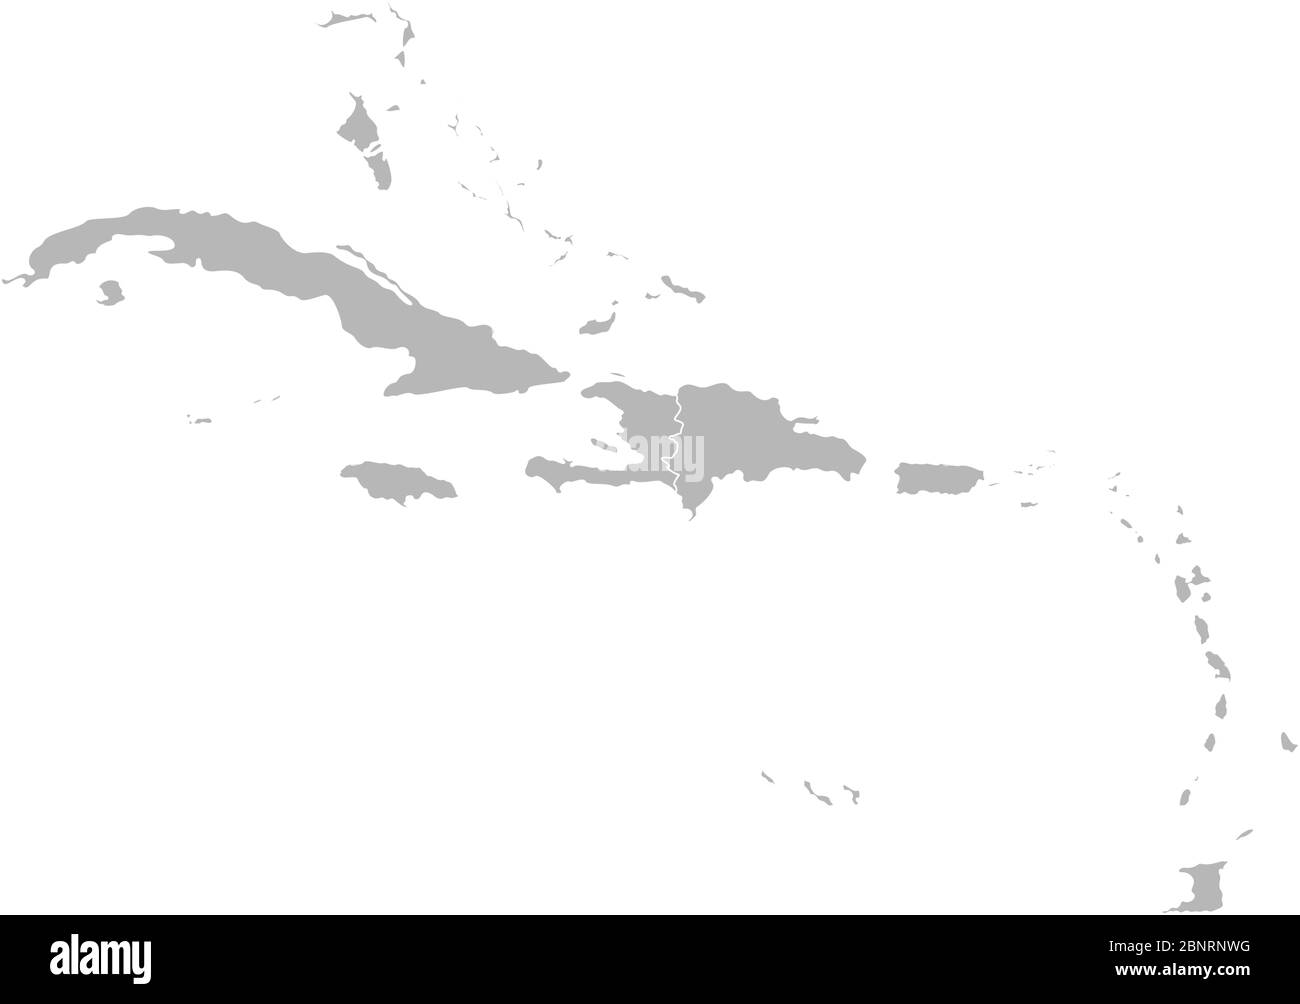 Caribbean island map vector graphics design. Gray background. Perfect for business concepts, backgrounds, backdrop, banner, poster, sticker, label and Stock Vector